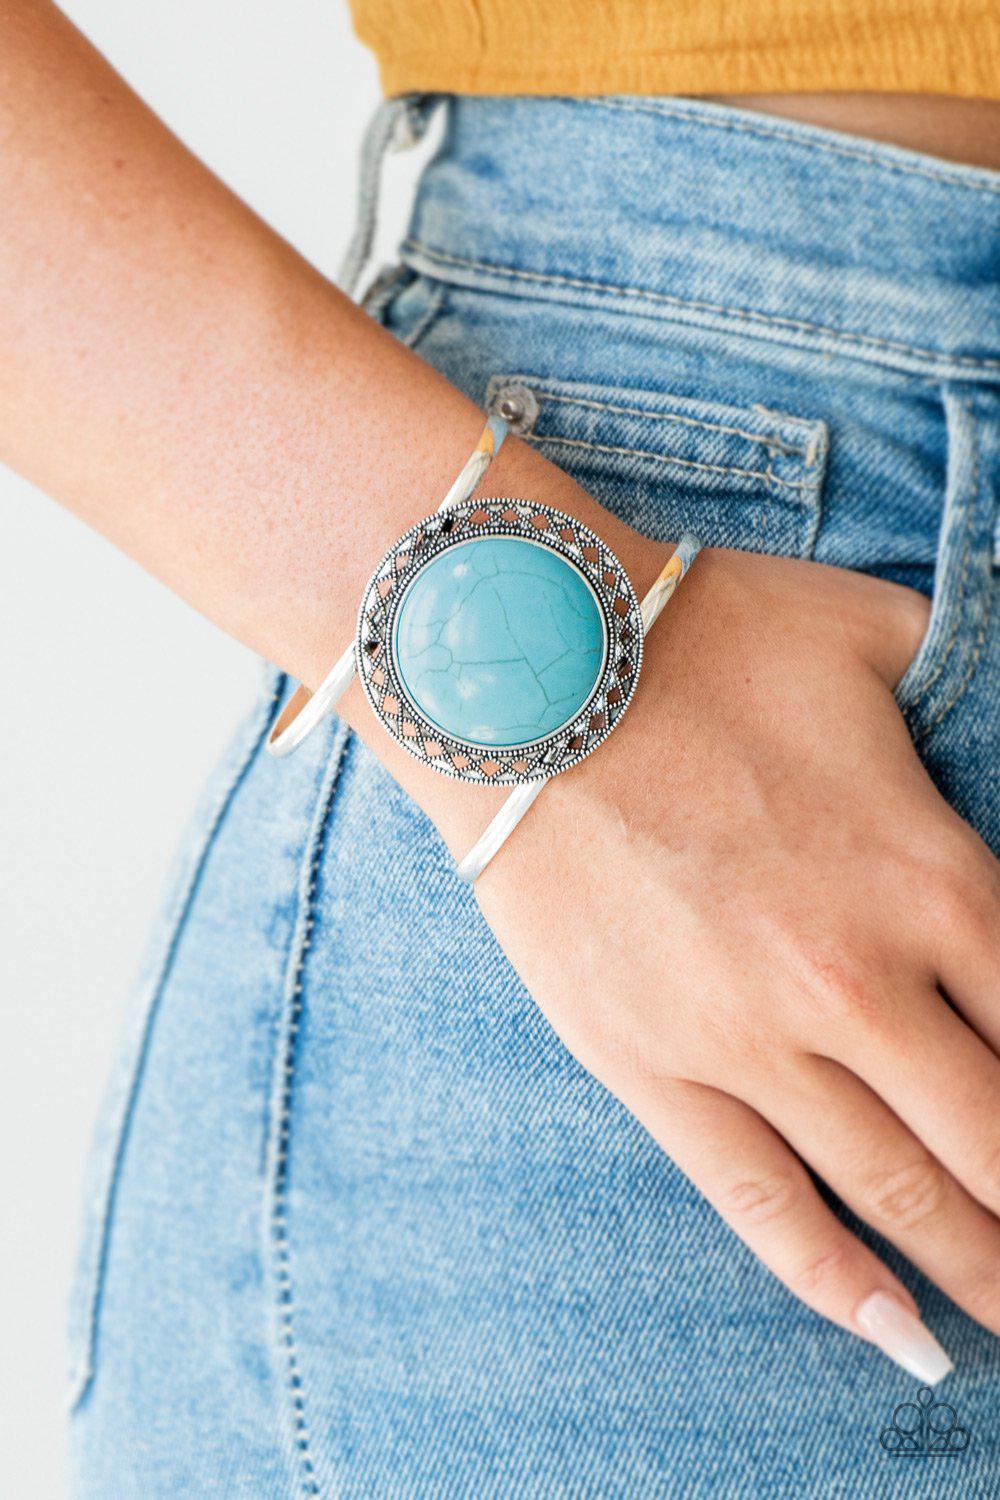 RODEO Rage Turquoise Blue Stone Cuff Bracelet - Paparazzi Accessories- lightbox - CarasShop.com - $5 Jewelry by Cara Jewels